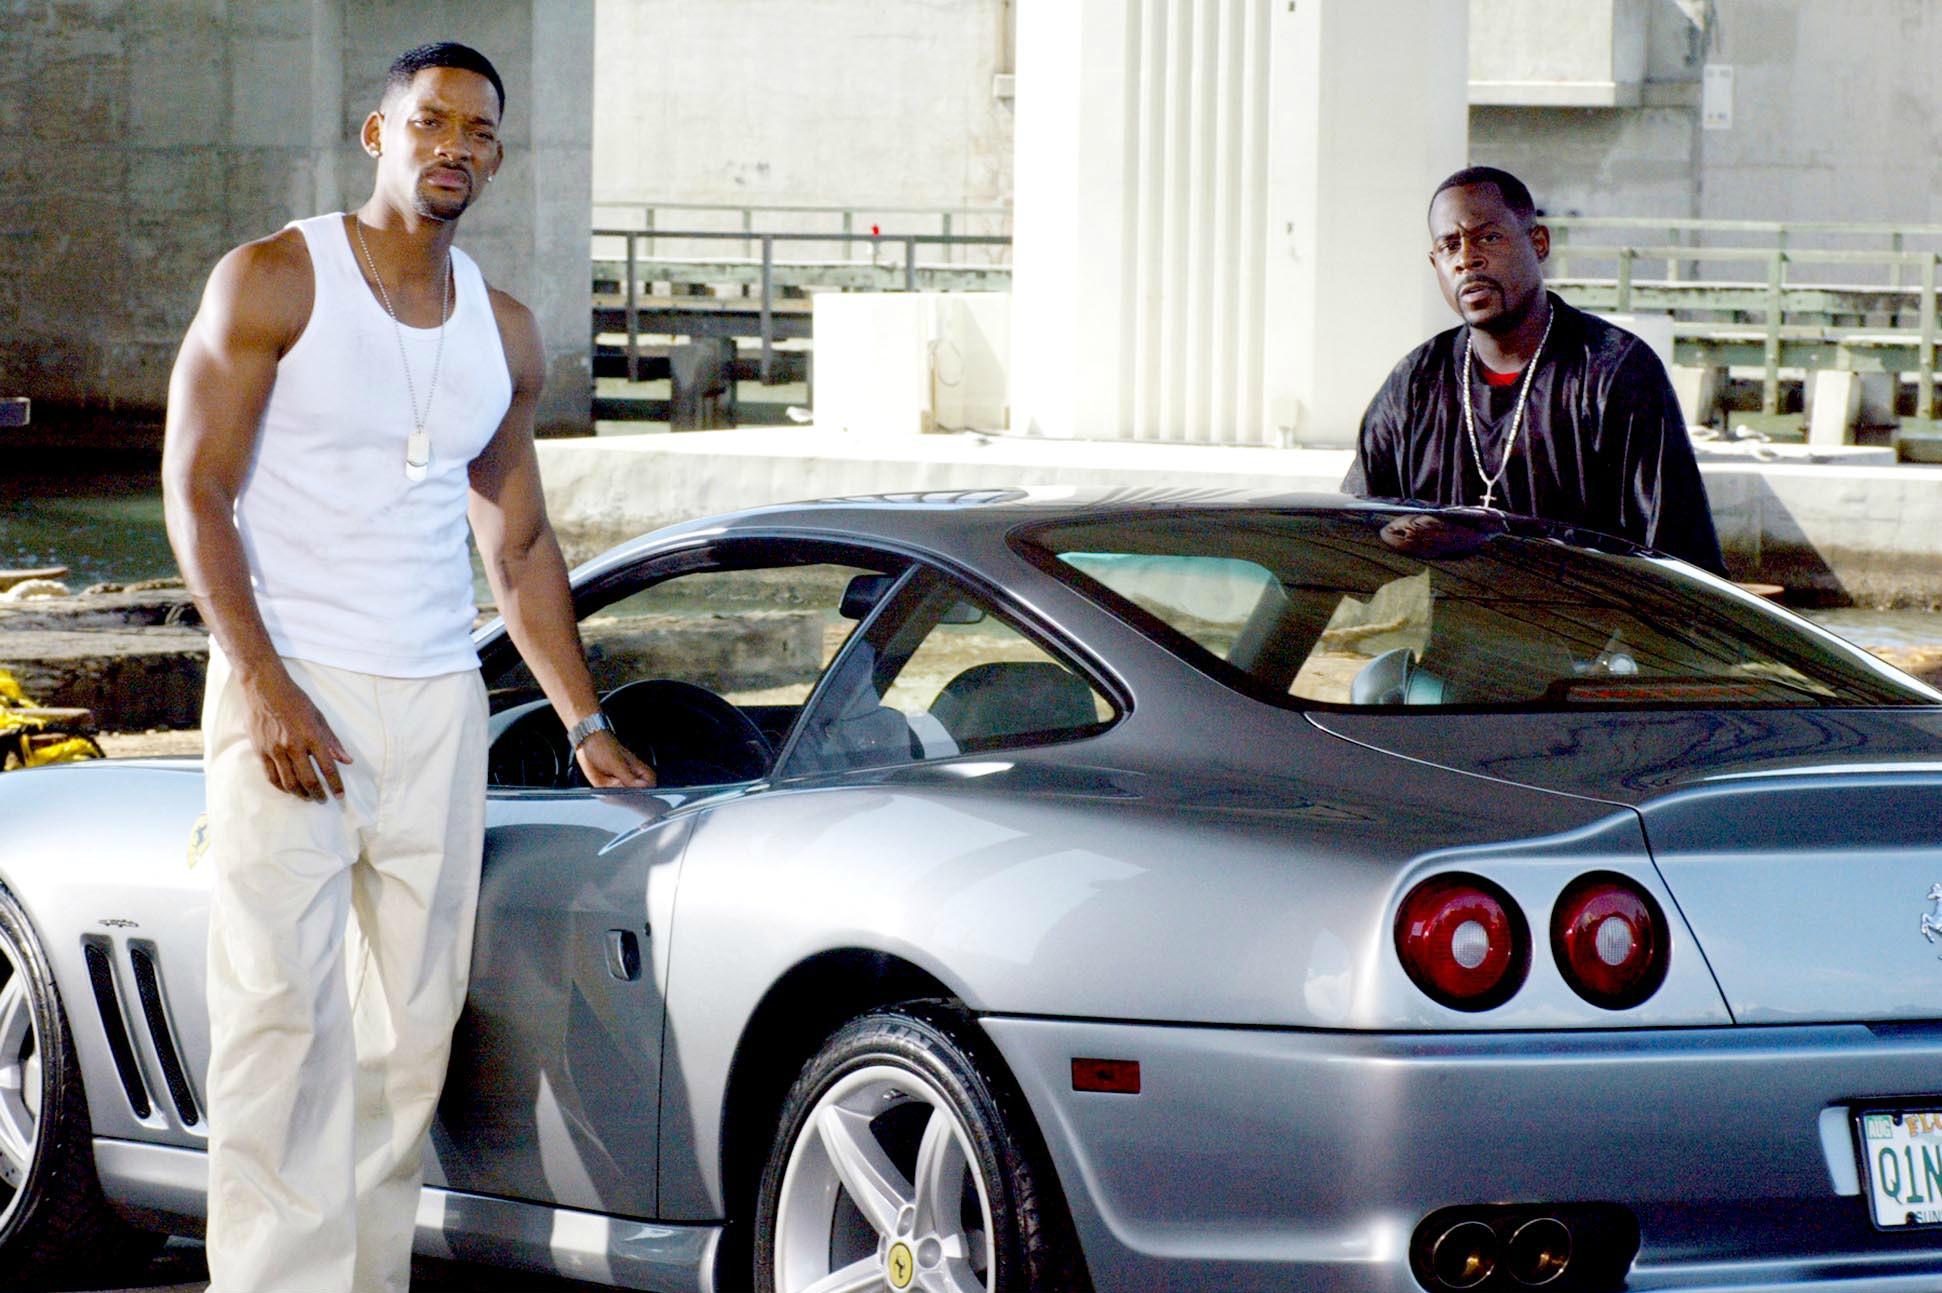 Bad Boys Artwork featuring Will Smith and Martin Lawrence